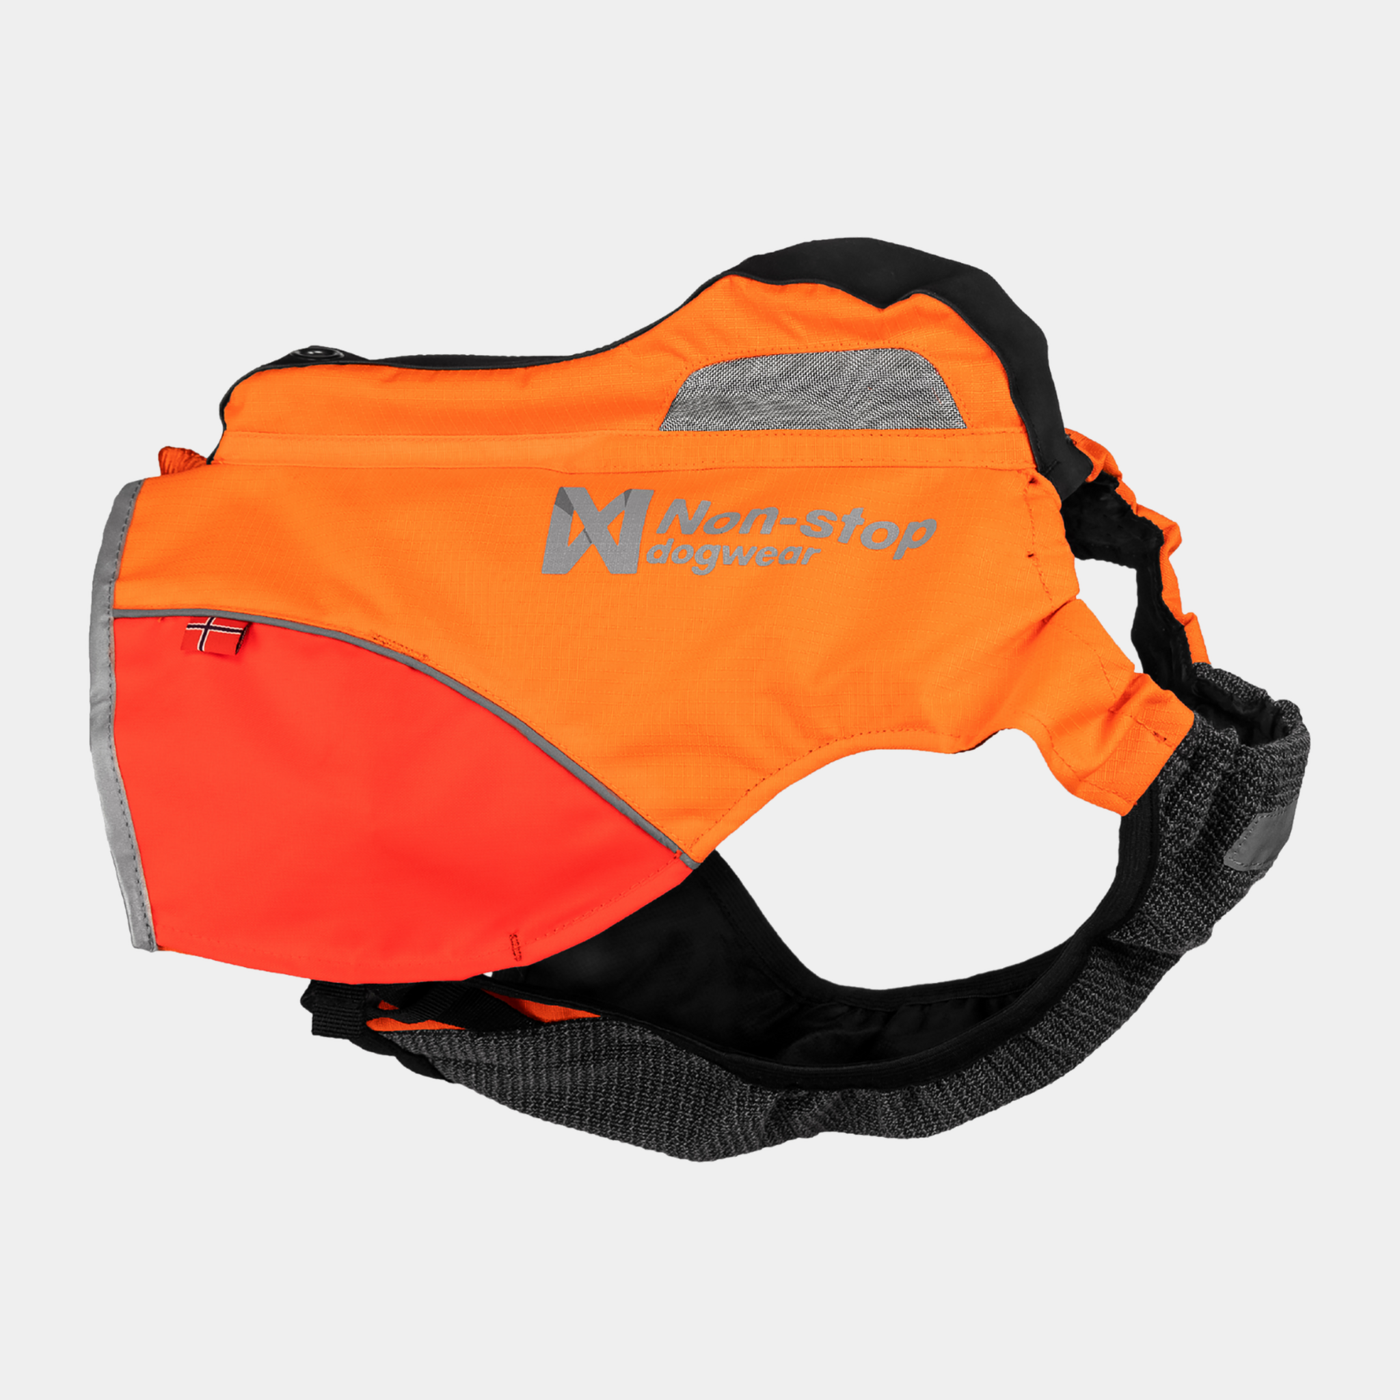 S Protector vest, GPS, Non-stop